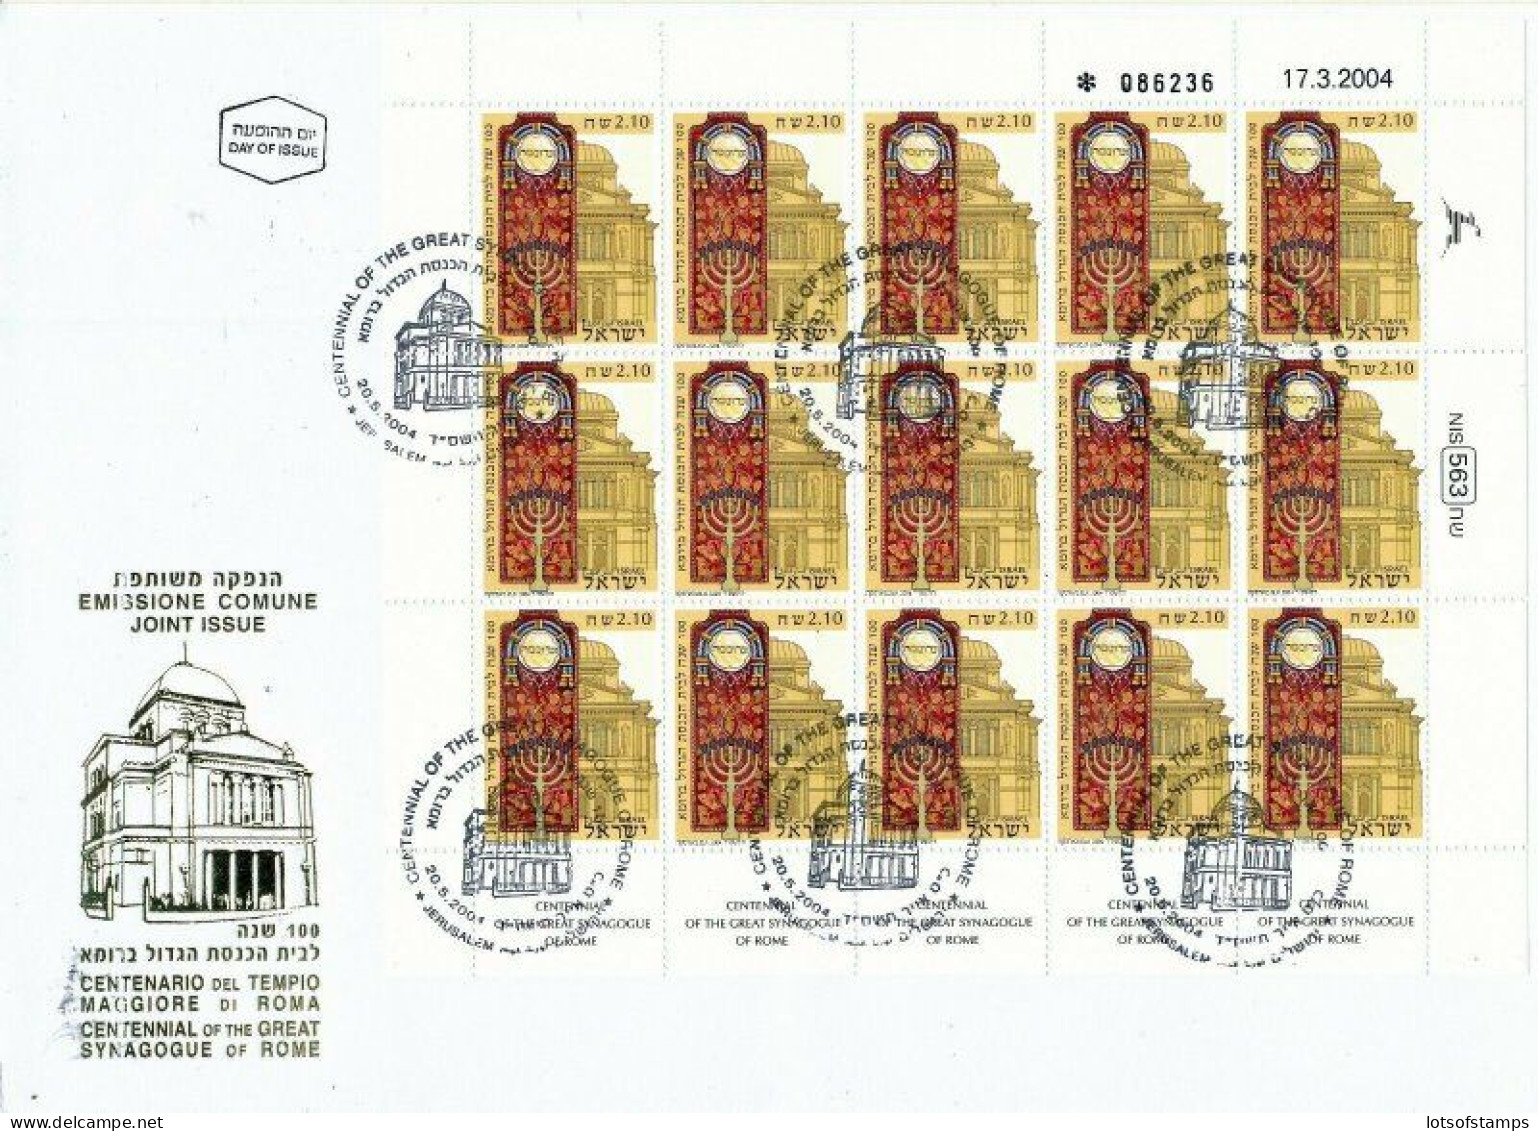 ISRAEL 2004 JOINT ISSUE WITH ITALY ROME SYNAGOGUE SHEET FDC's SEE 2 SCAN - Briefe U. Dokumente